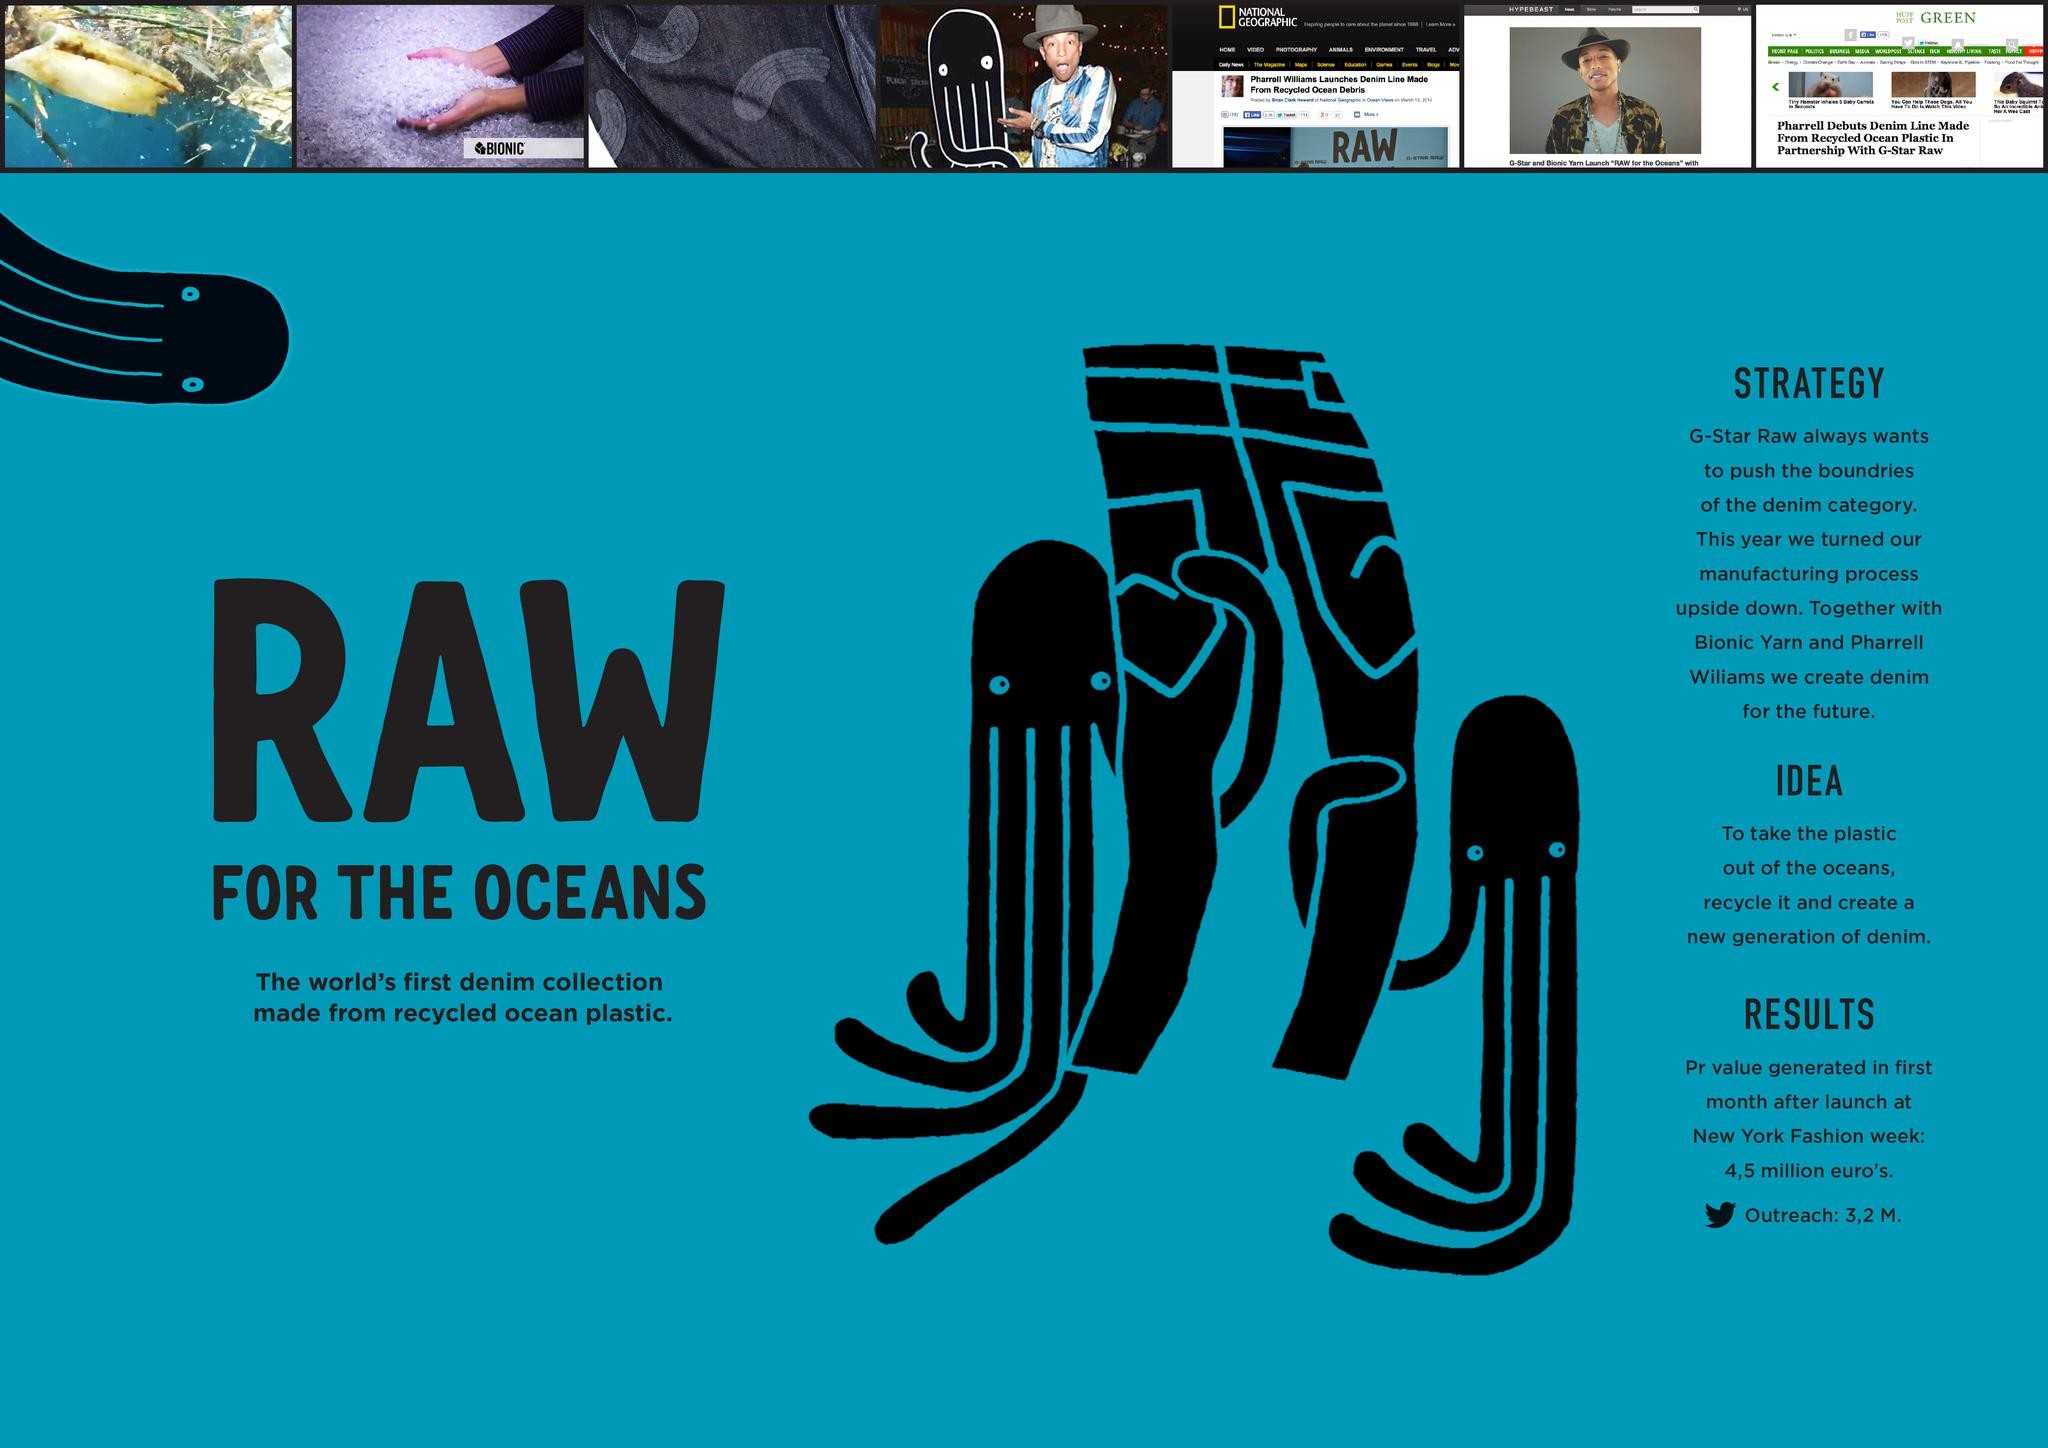 RAW FOR THE OCEANS